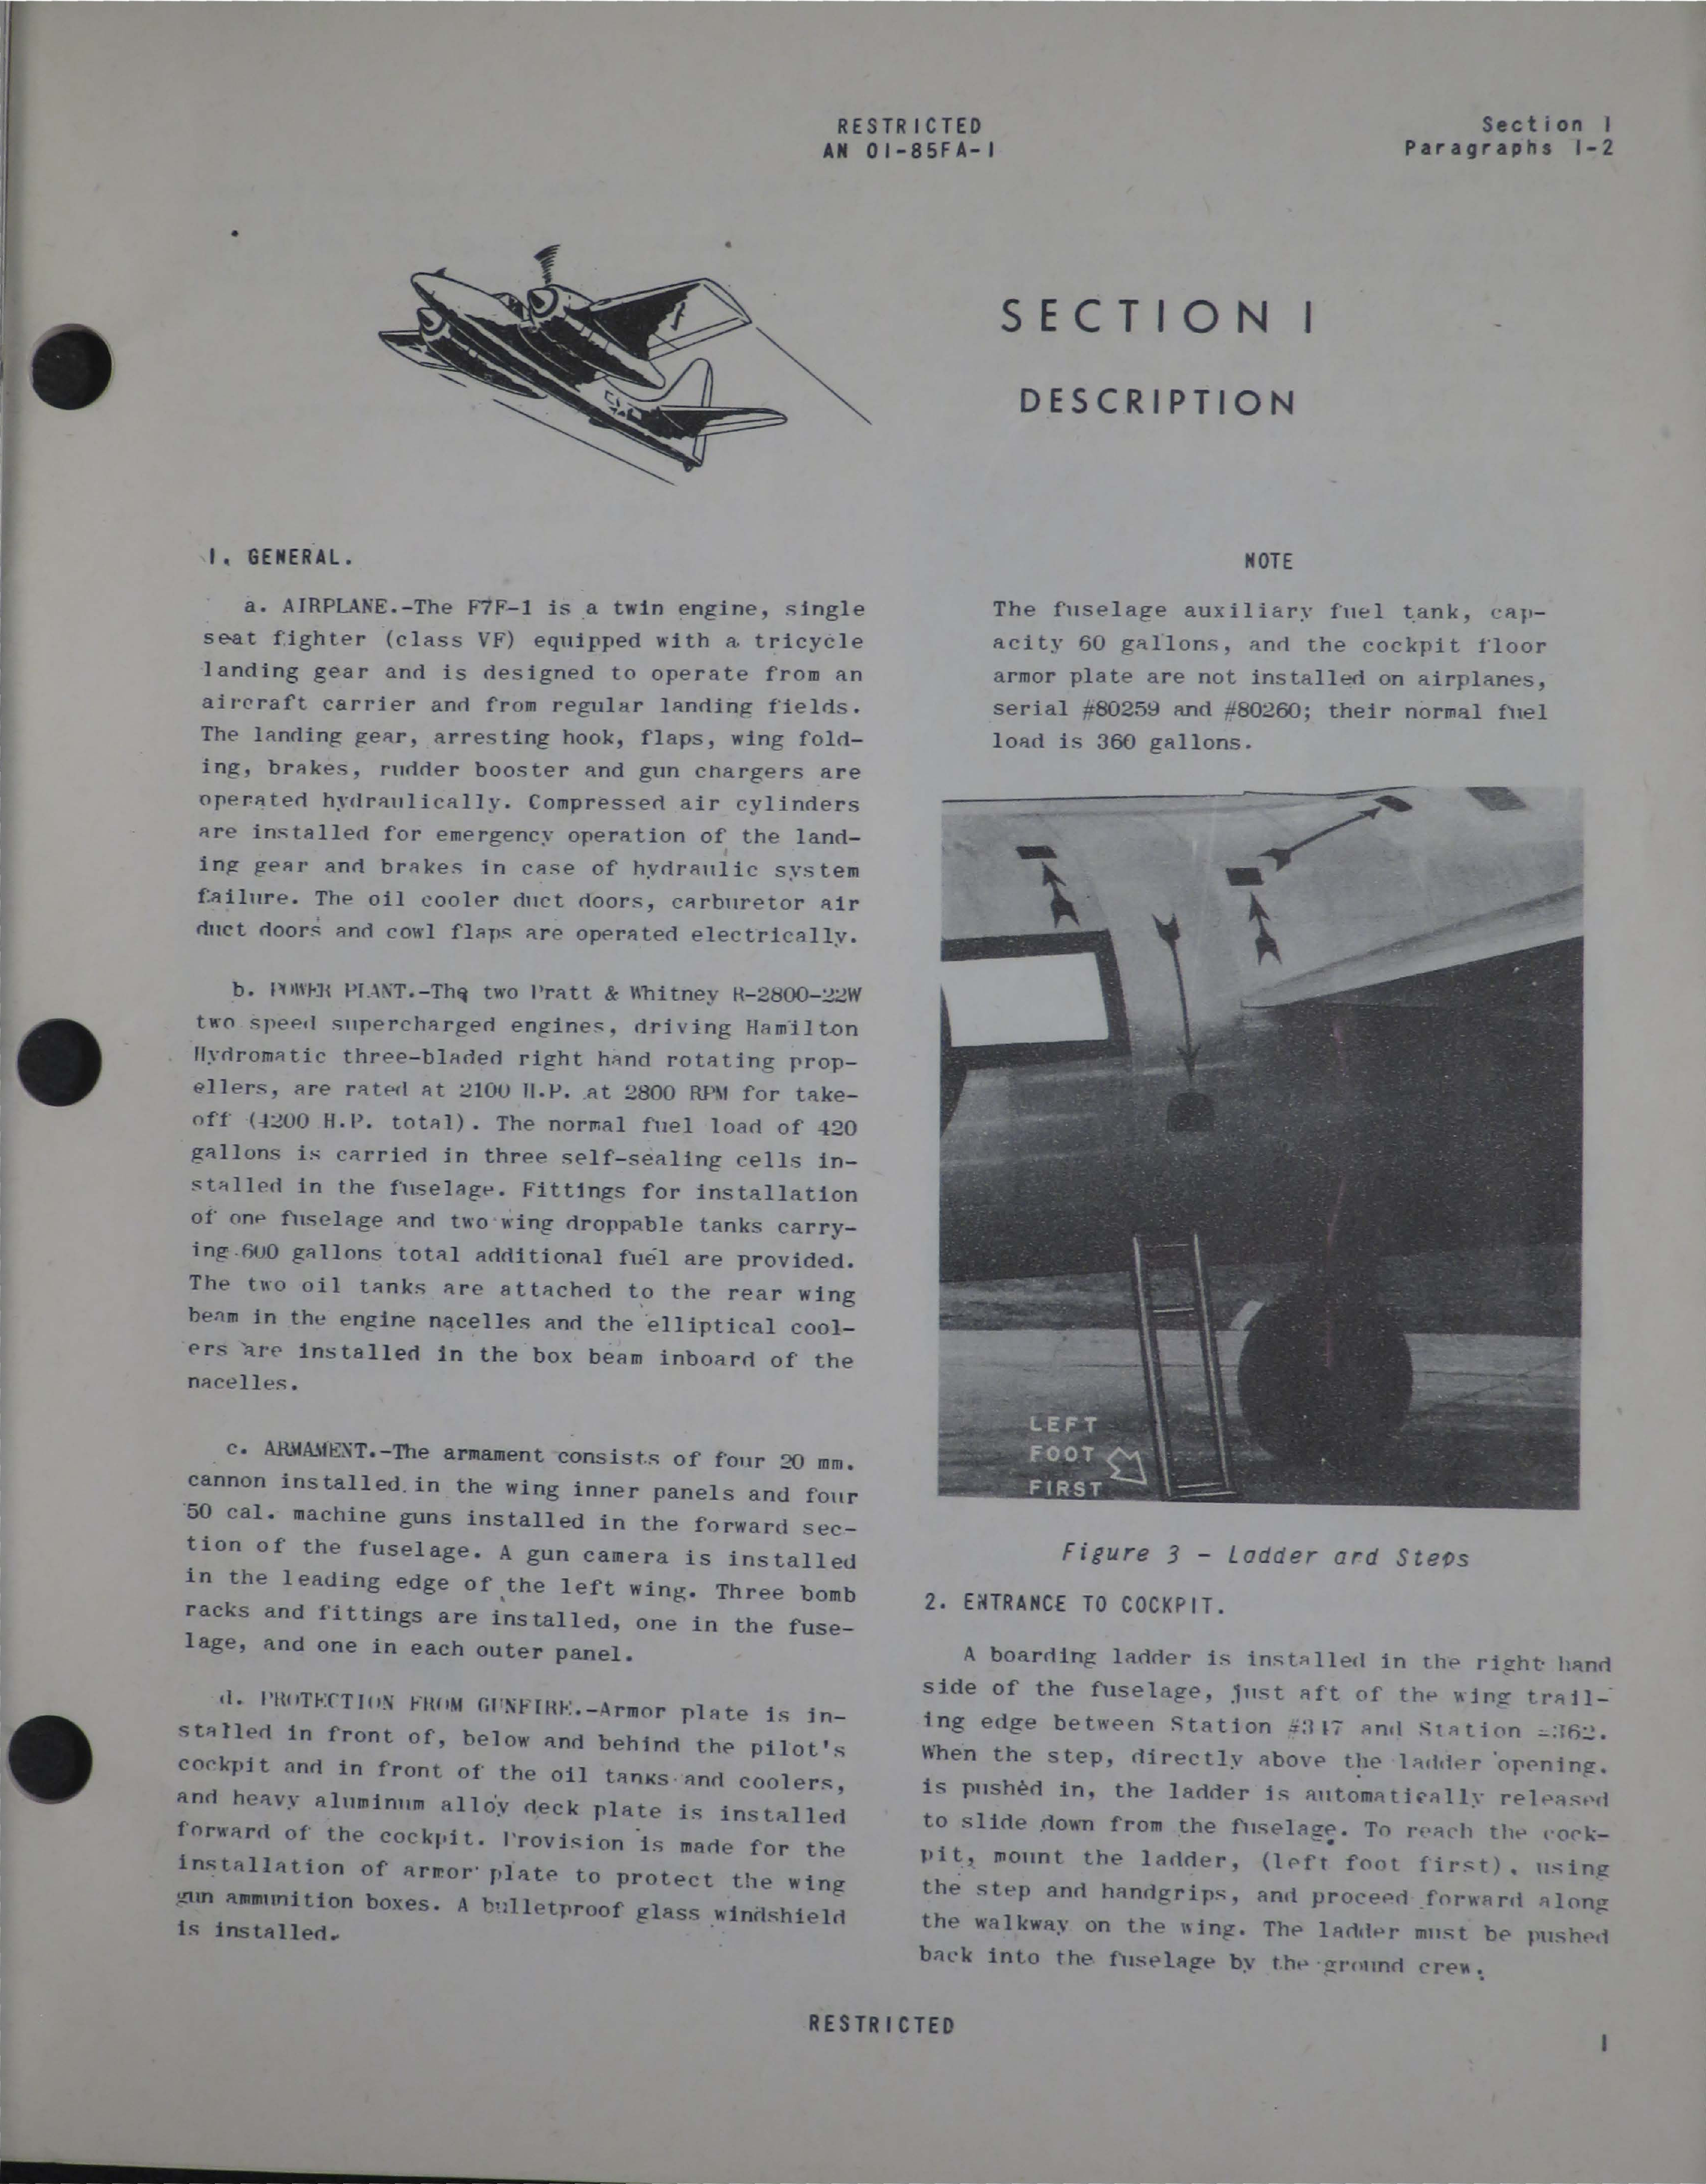 Sample page 9 from AirCorps Library document: Handbook of Pilots Flight Operating Instructions for F7F-1